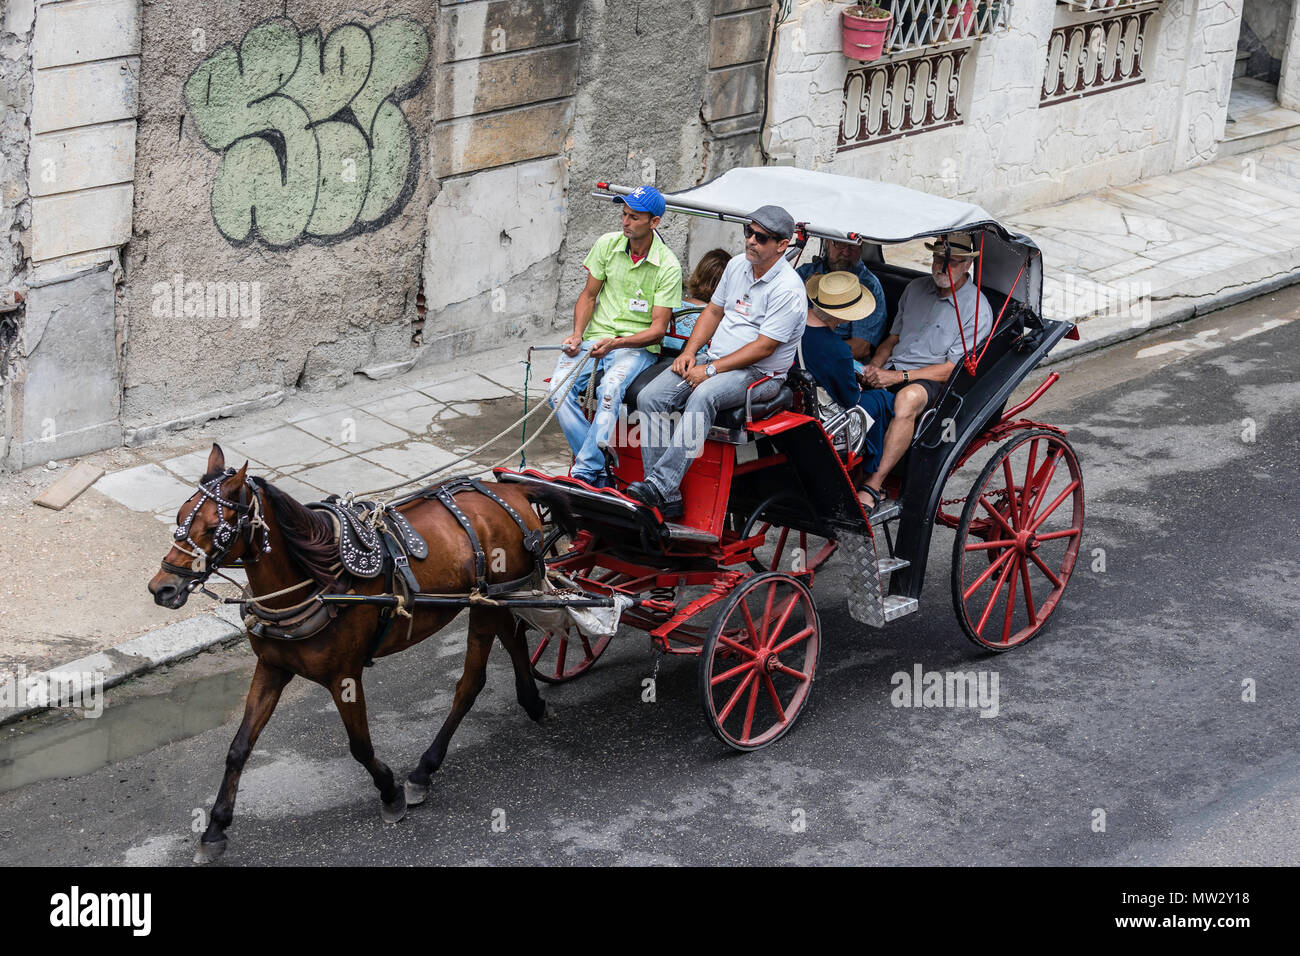 Horse-drawn carts known locally as coaches for hire in Havana, Cuba Stock Photo